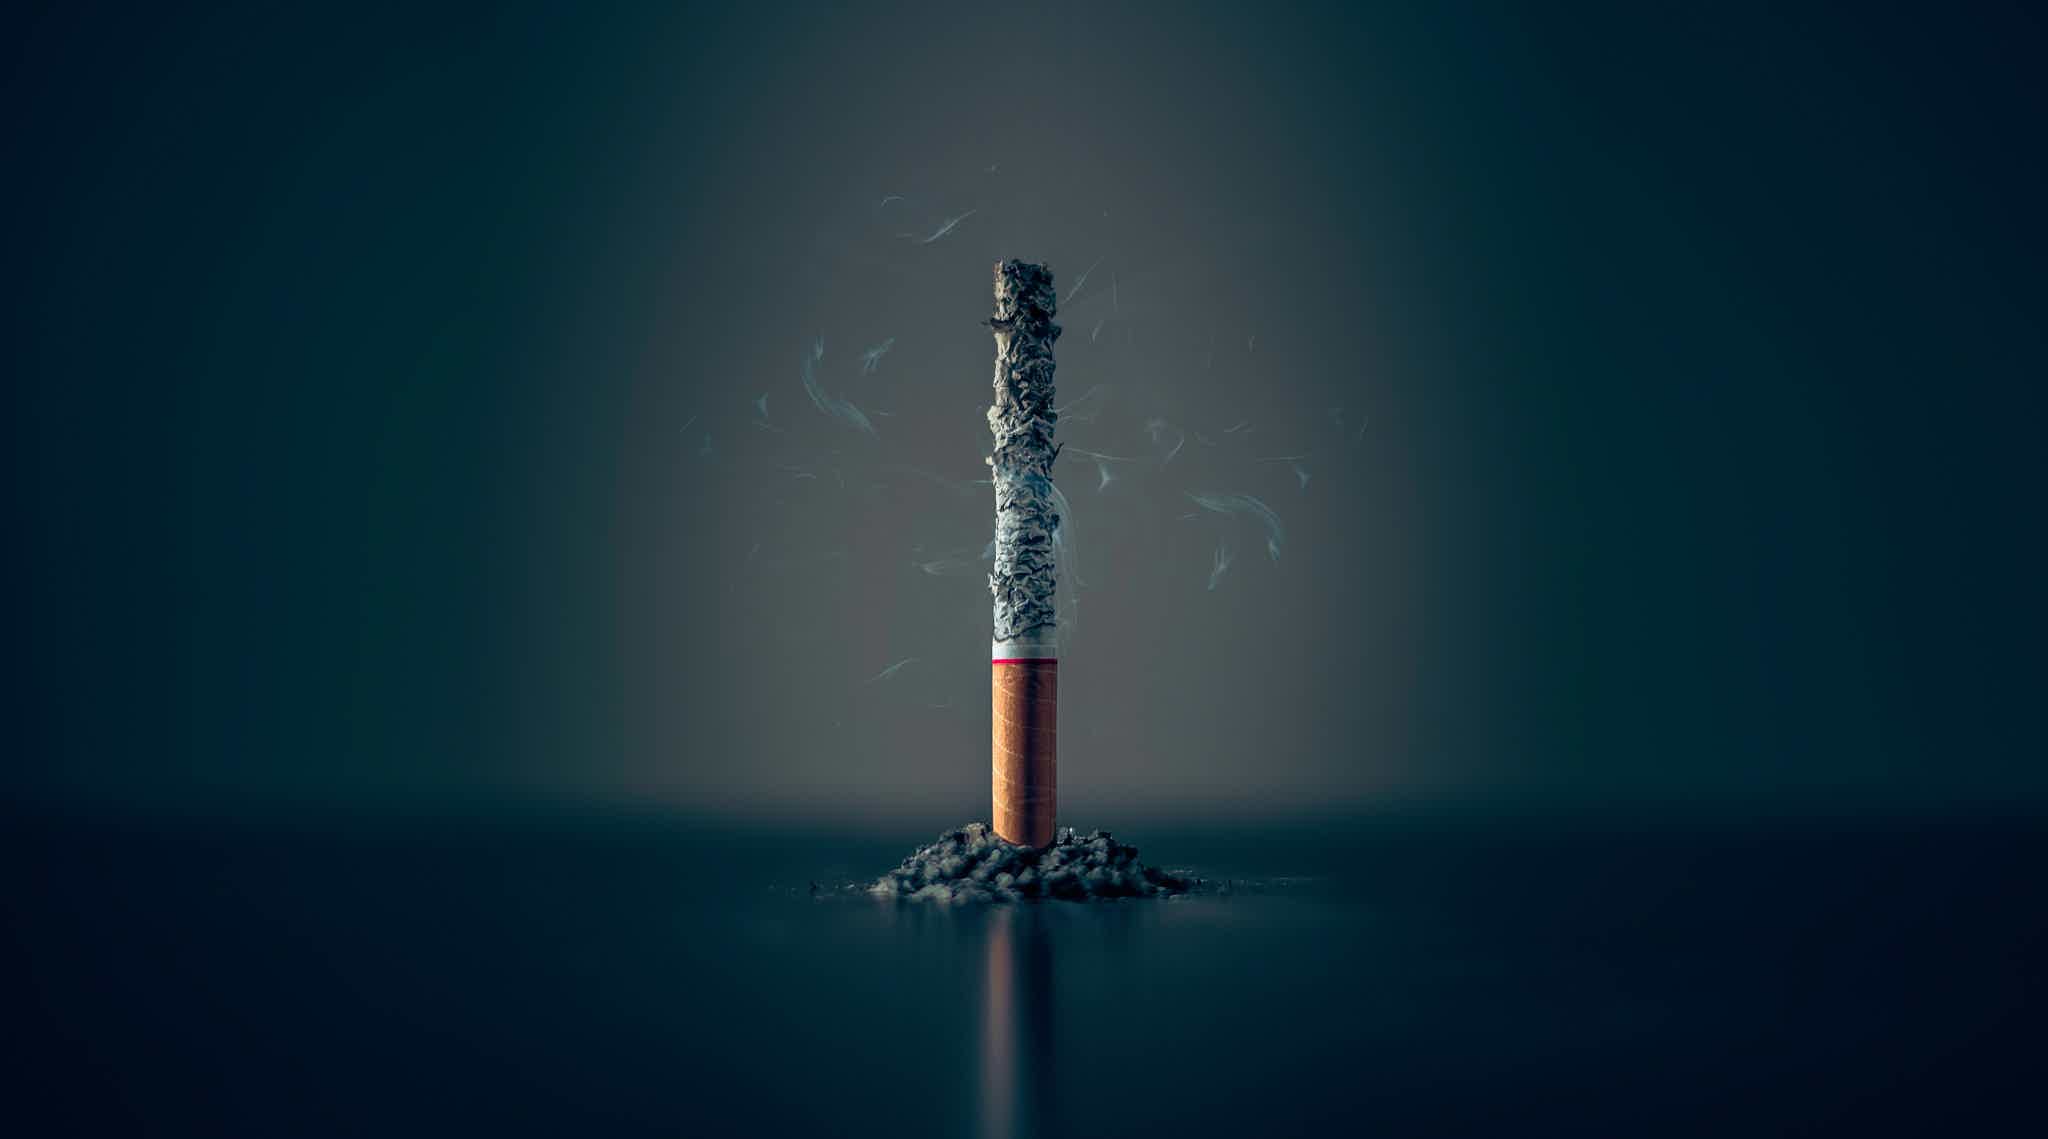 Tobaccon and impact your finances negatively. Source: Unsplash.